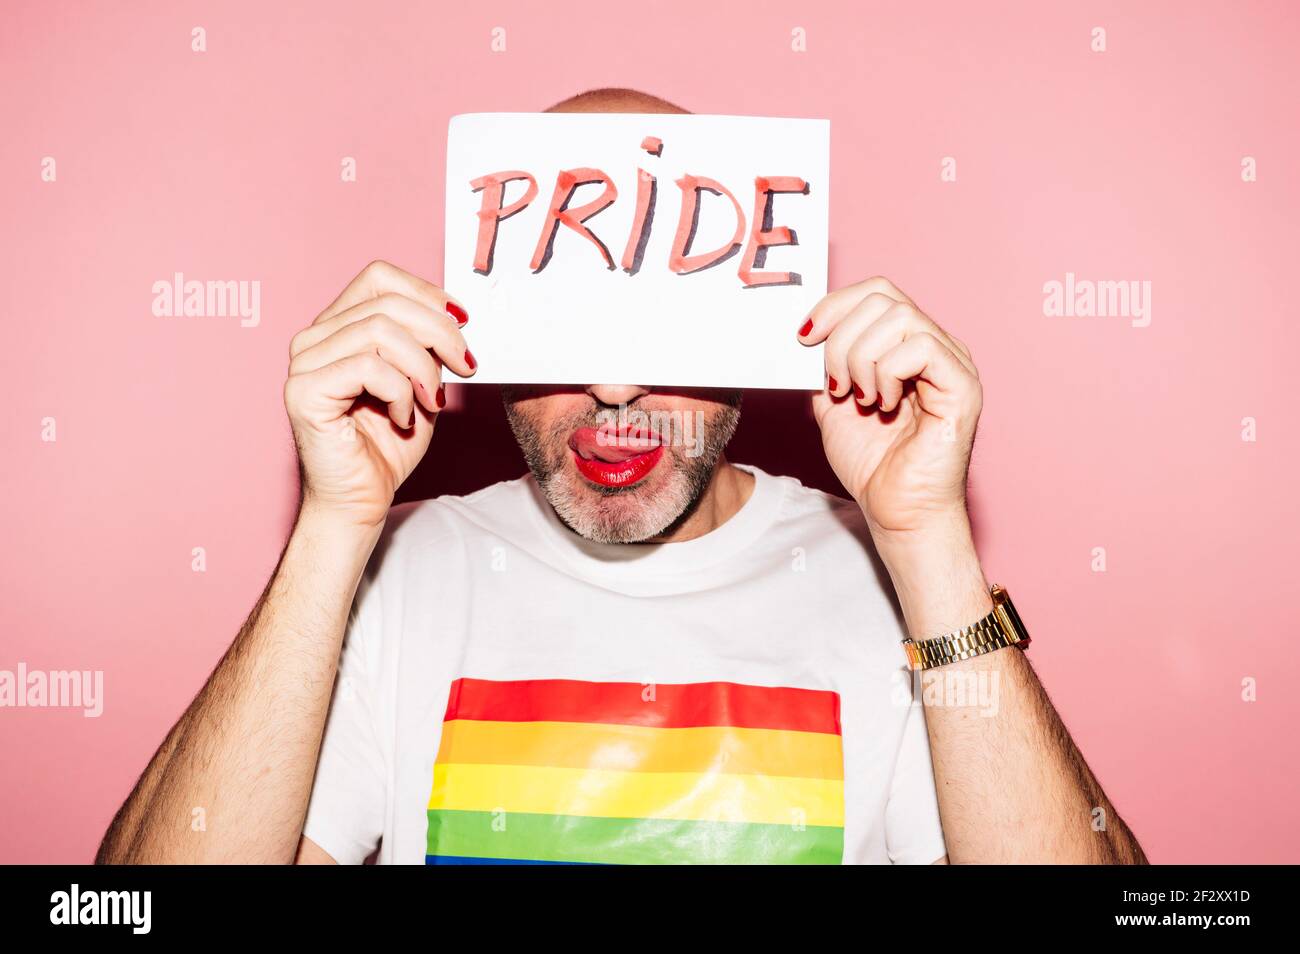 Rebellious bearded homosexual man with red lips and manicure making grimace with tongue out while showing and covering face with paper with Pride text Stock Photo